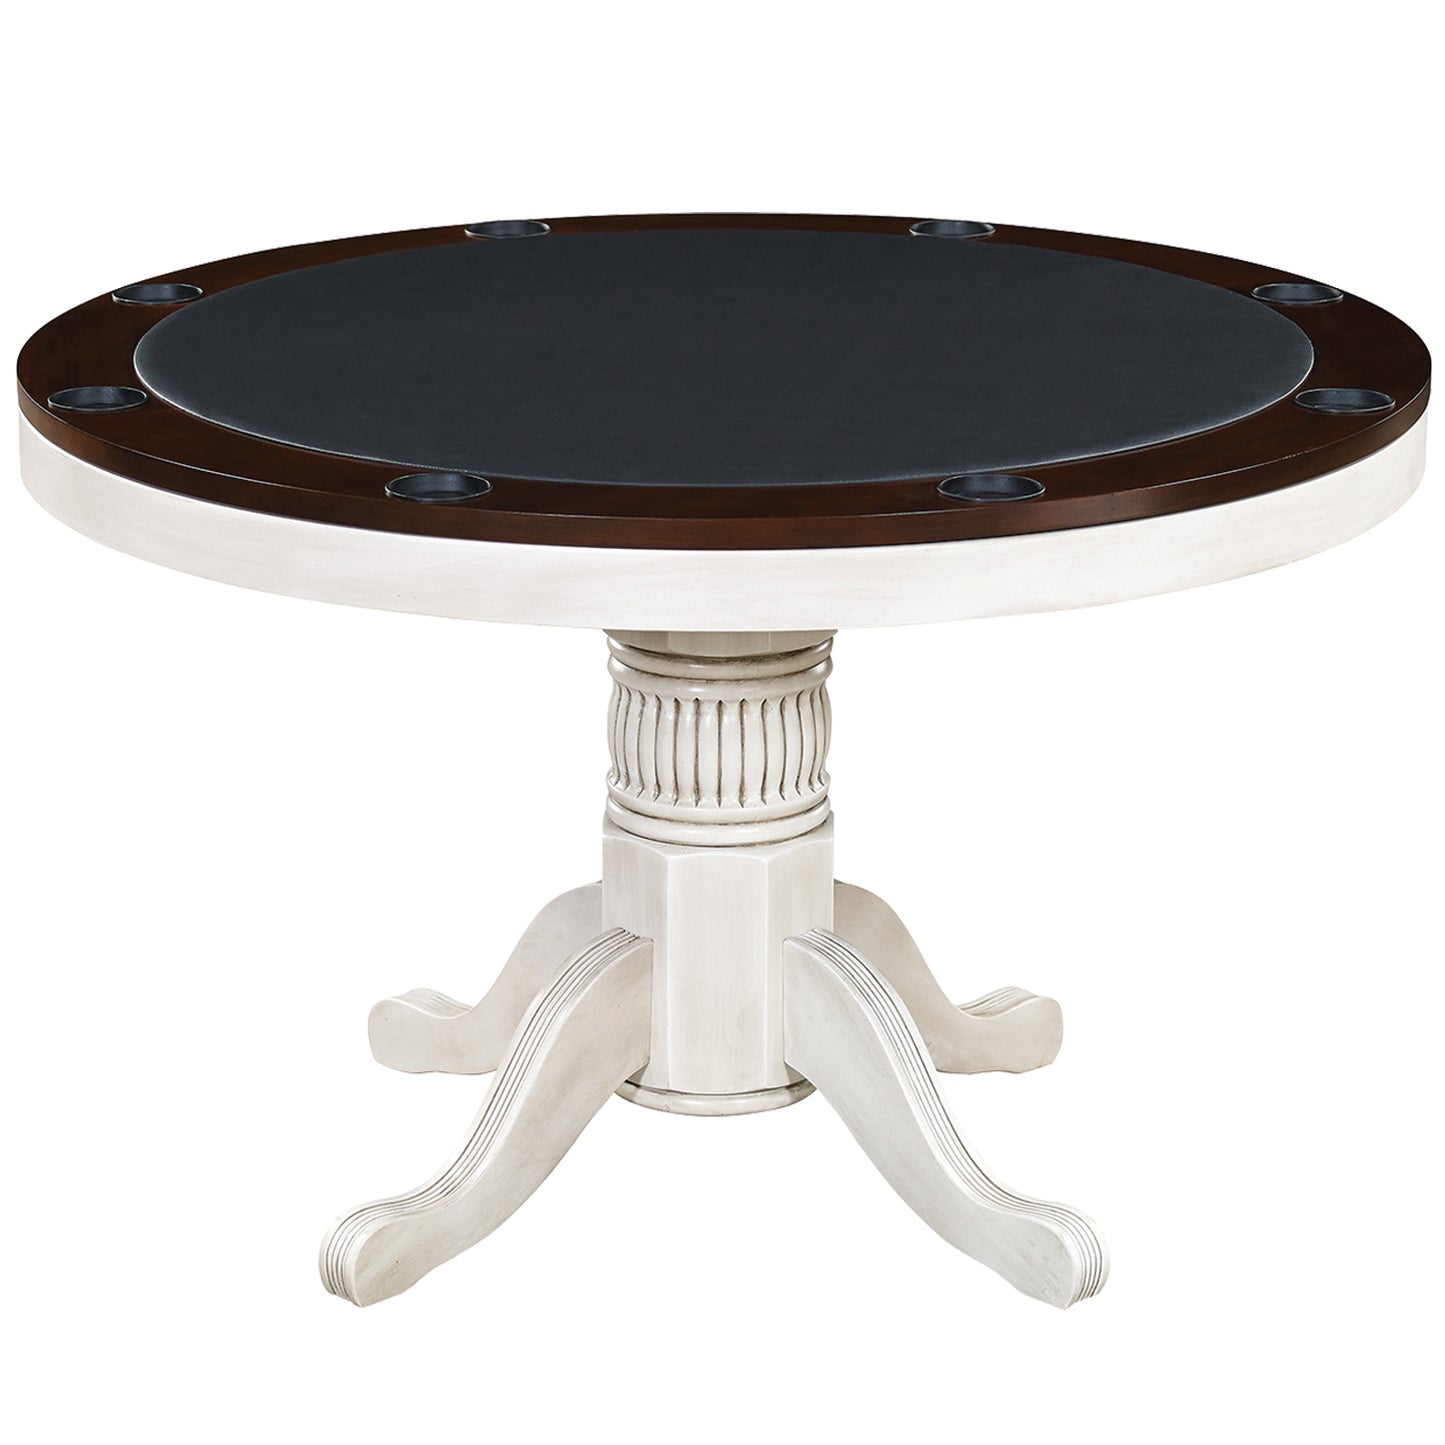 Round convertible game table with a black padded vinyl game top in an antique white finish.